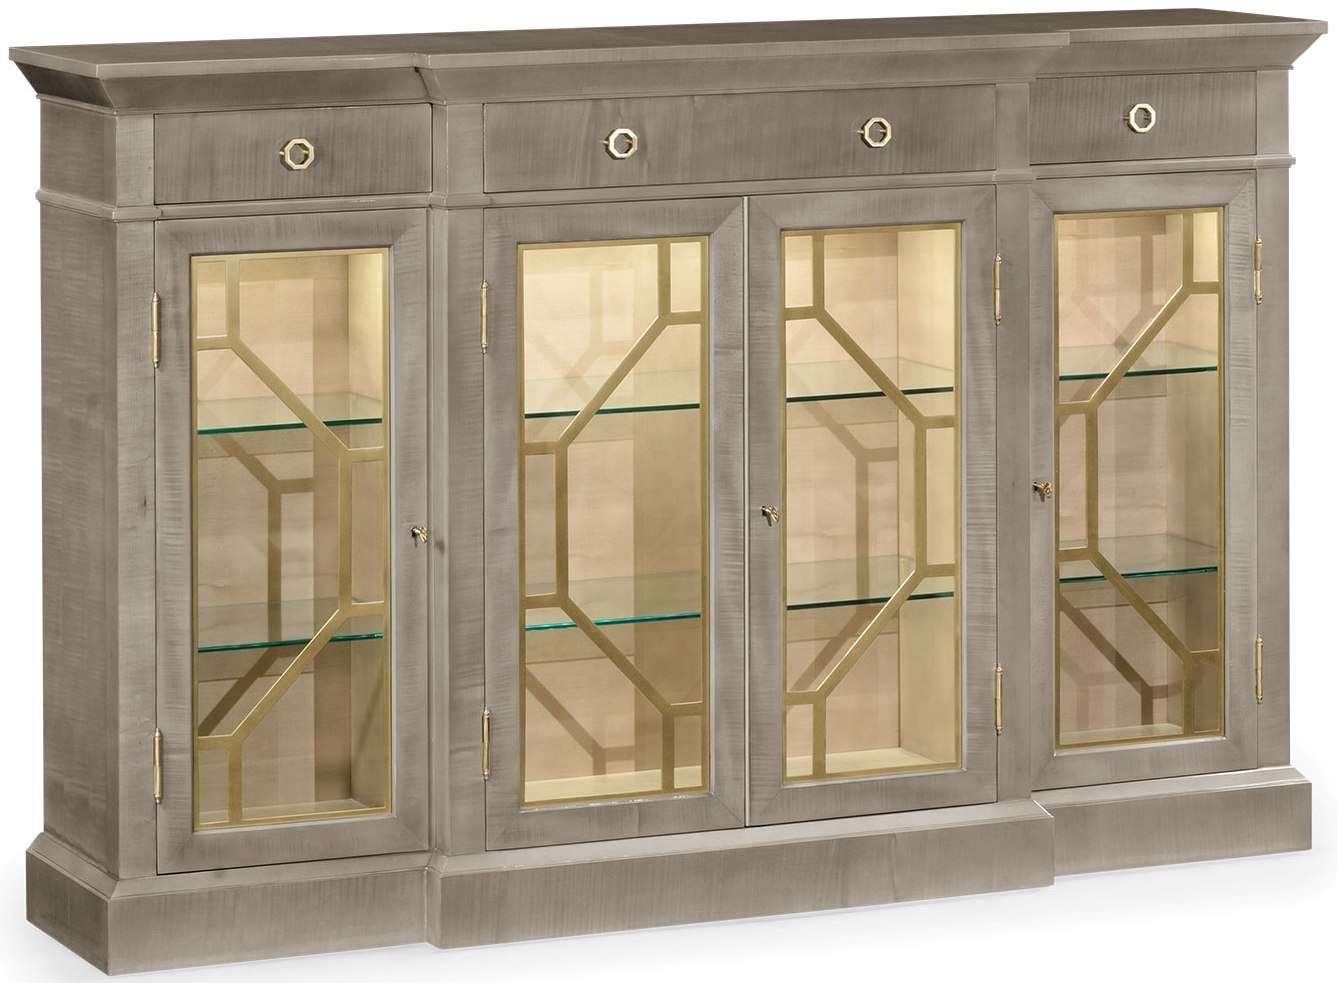 Breakfronts & China Cabinets Grey Sycamore Breakfront Display Cabinet with 4 Doors